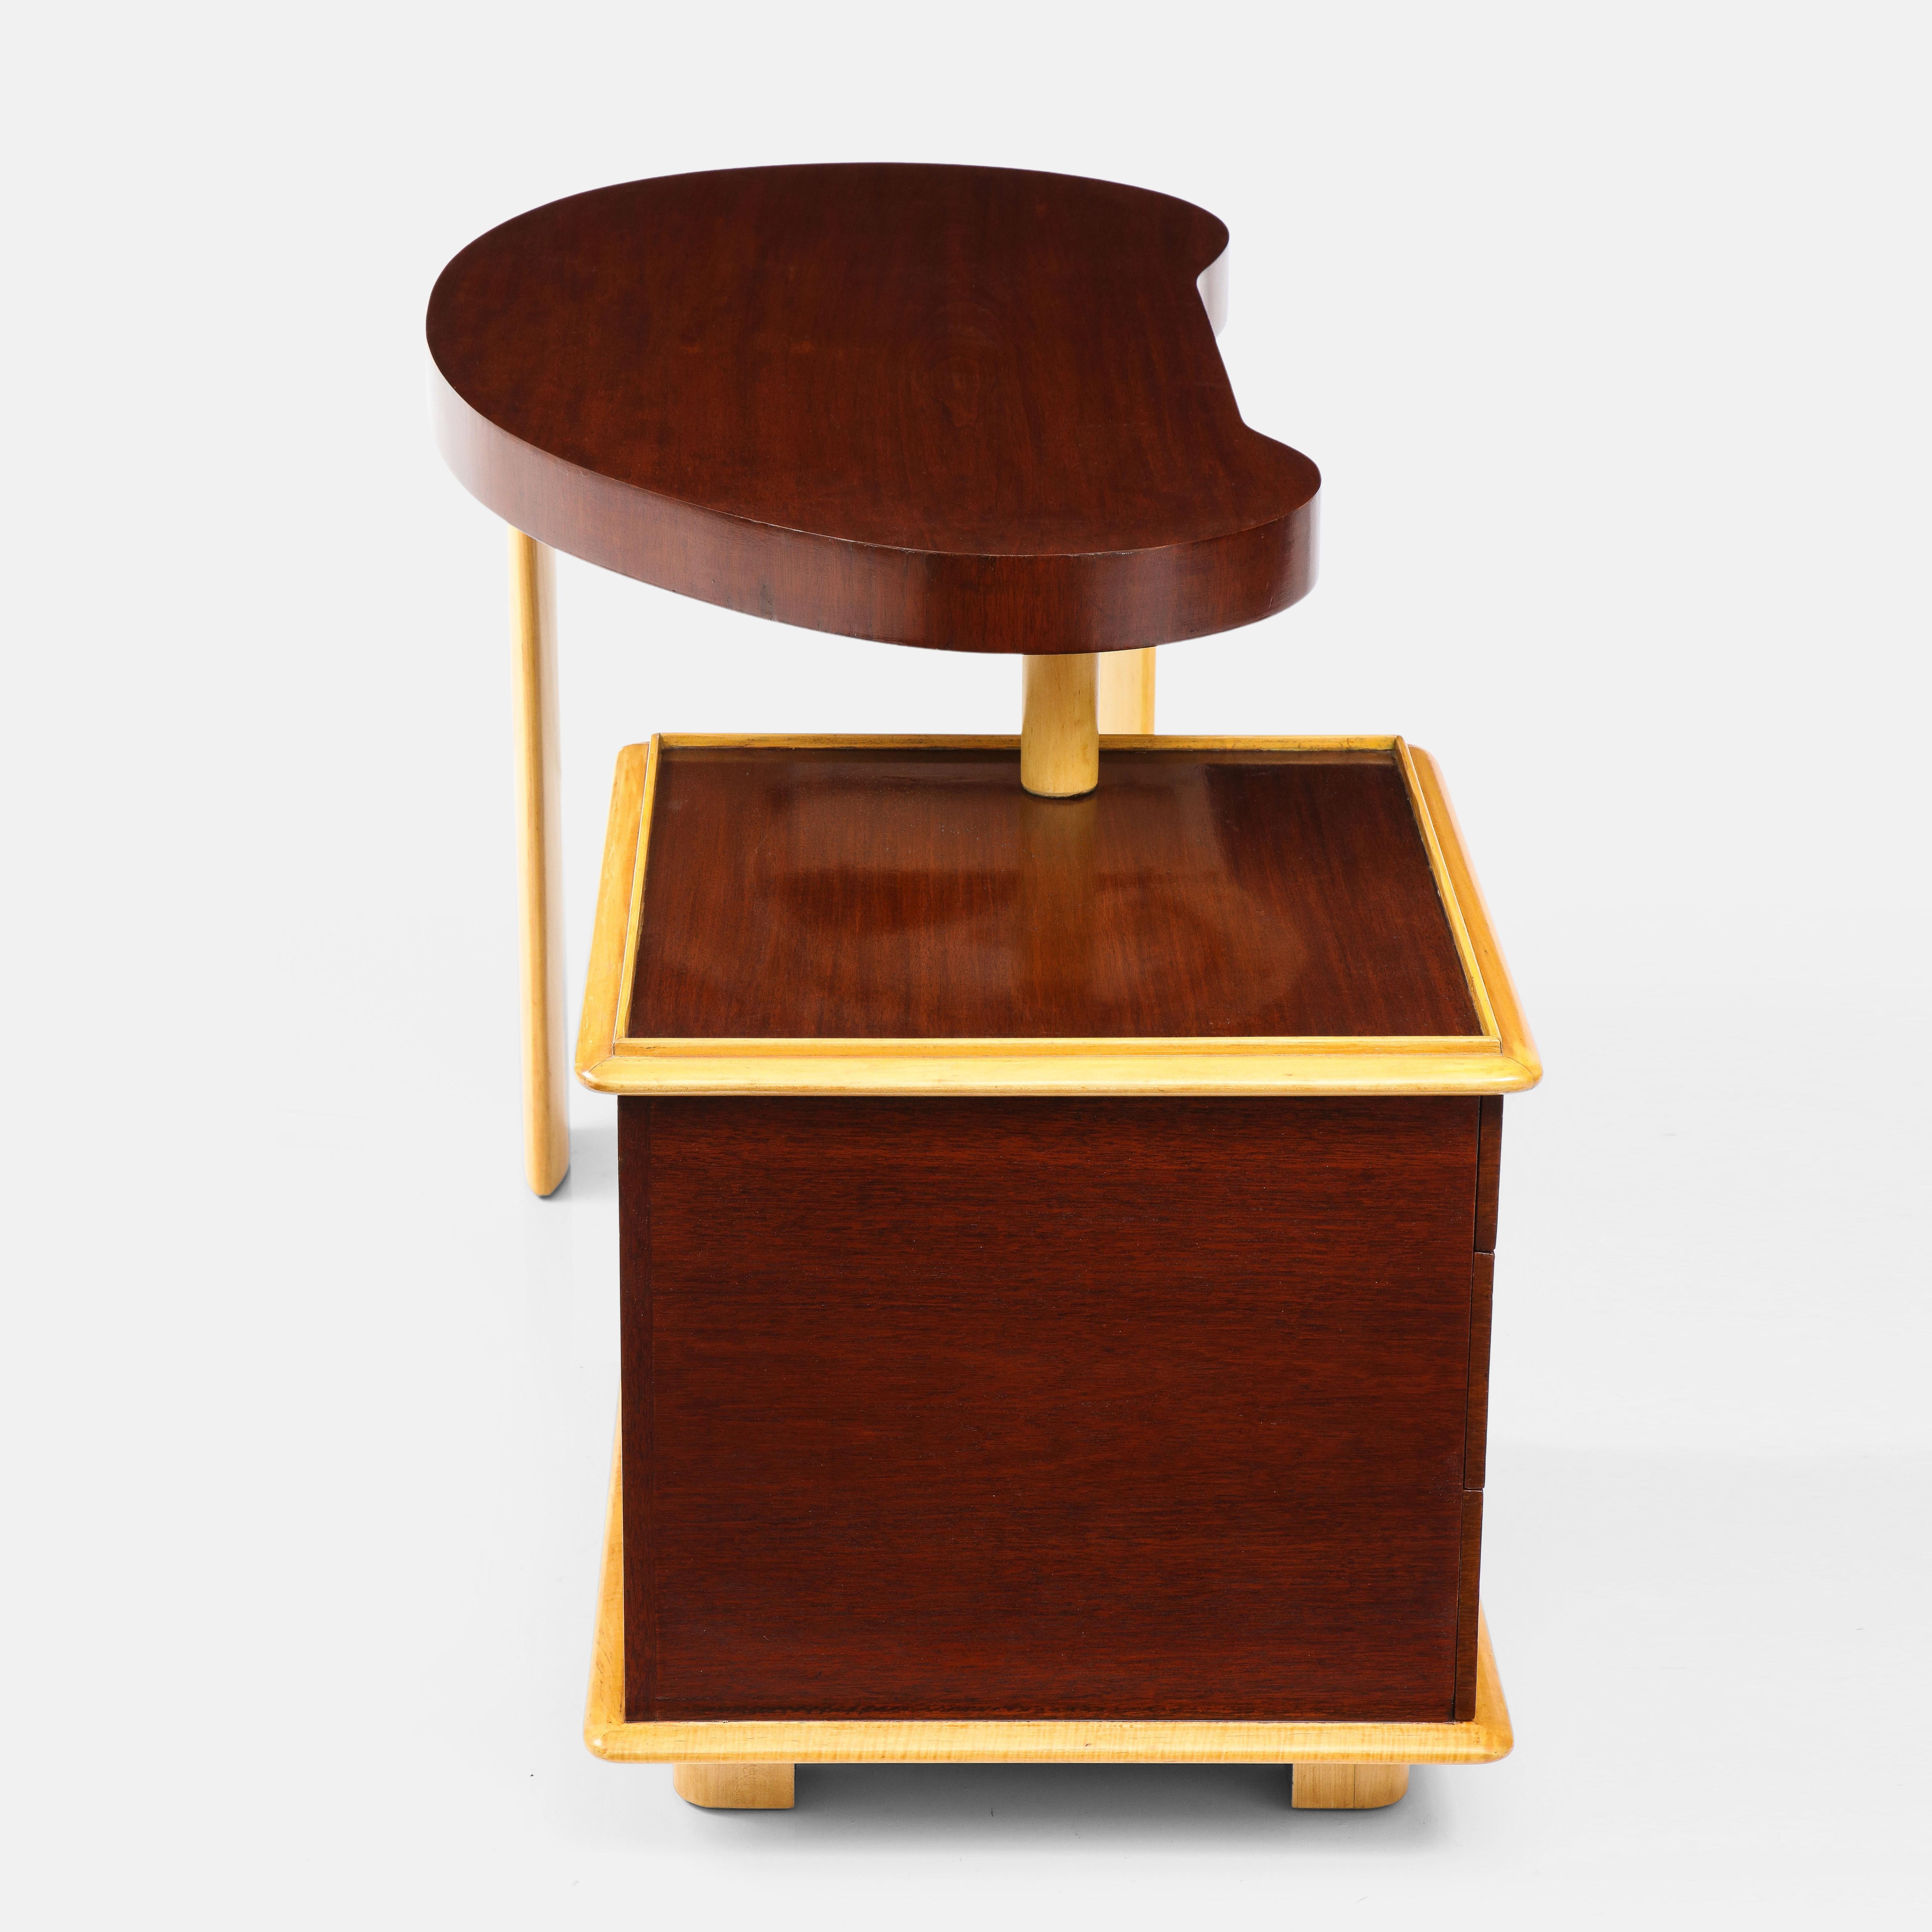 American Paul Frankl Rare Kidney Desk in Mahogany, Birch, Leather and Brass, USA, 1950s For Sale